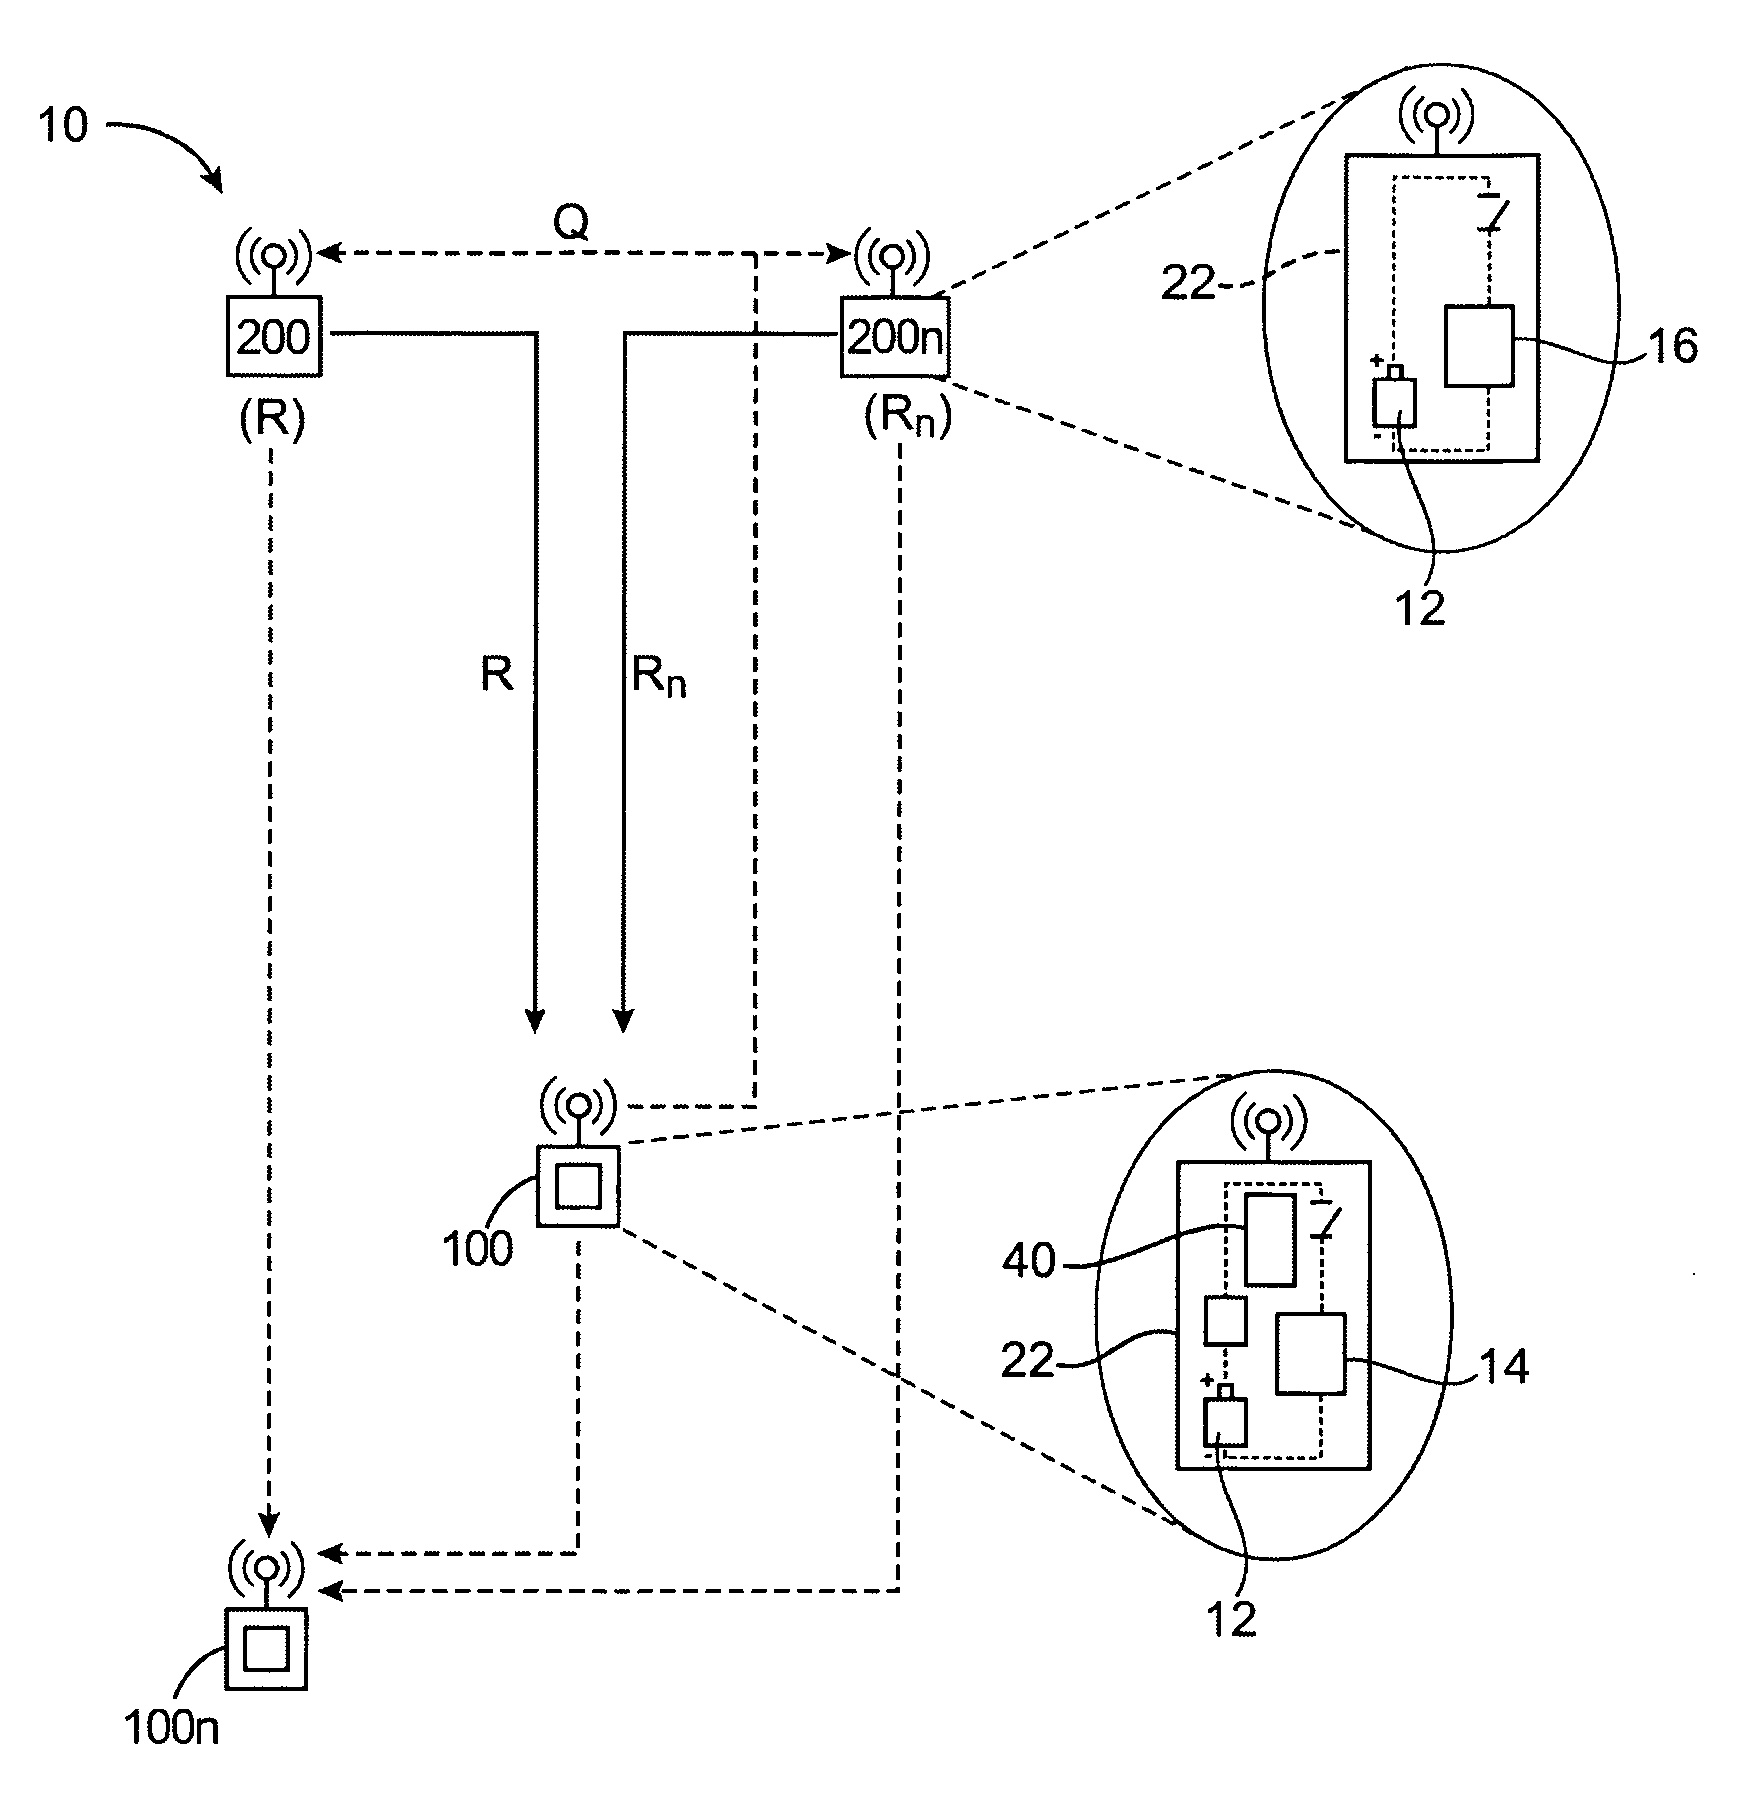 Mobile child monitoring system and methods of use